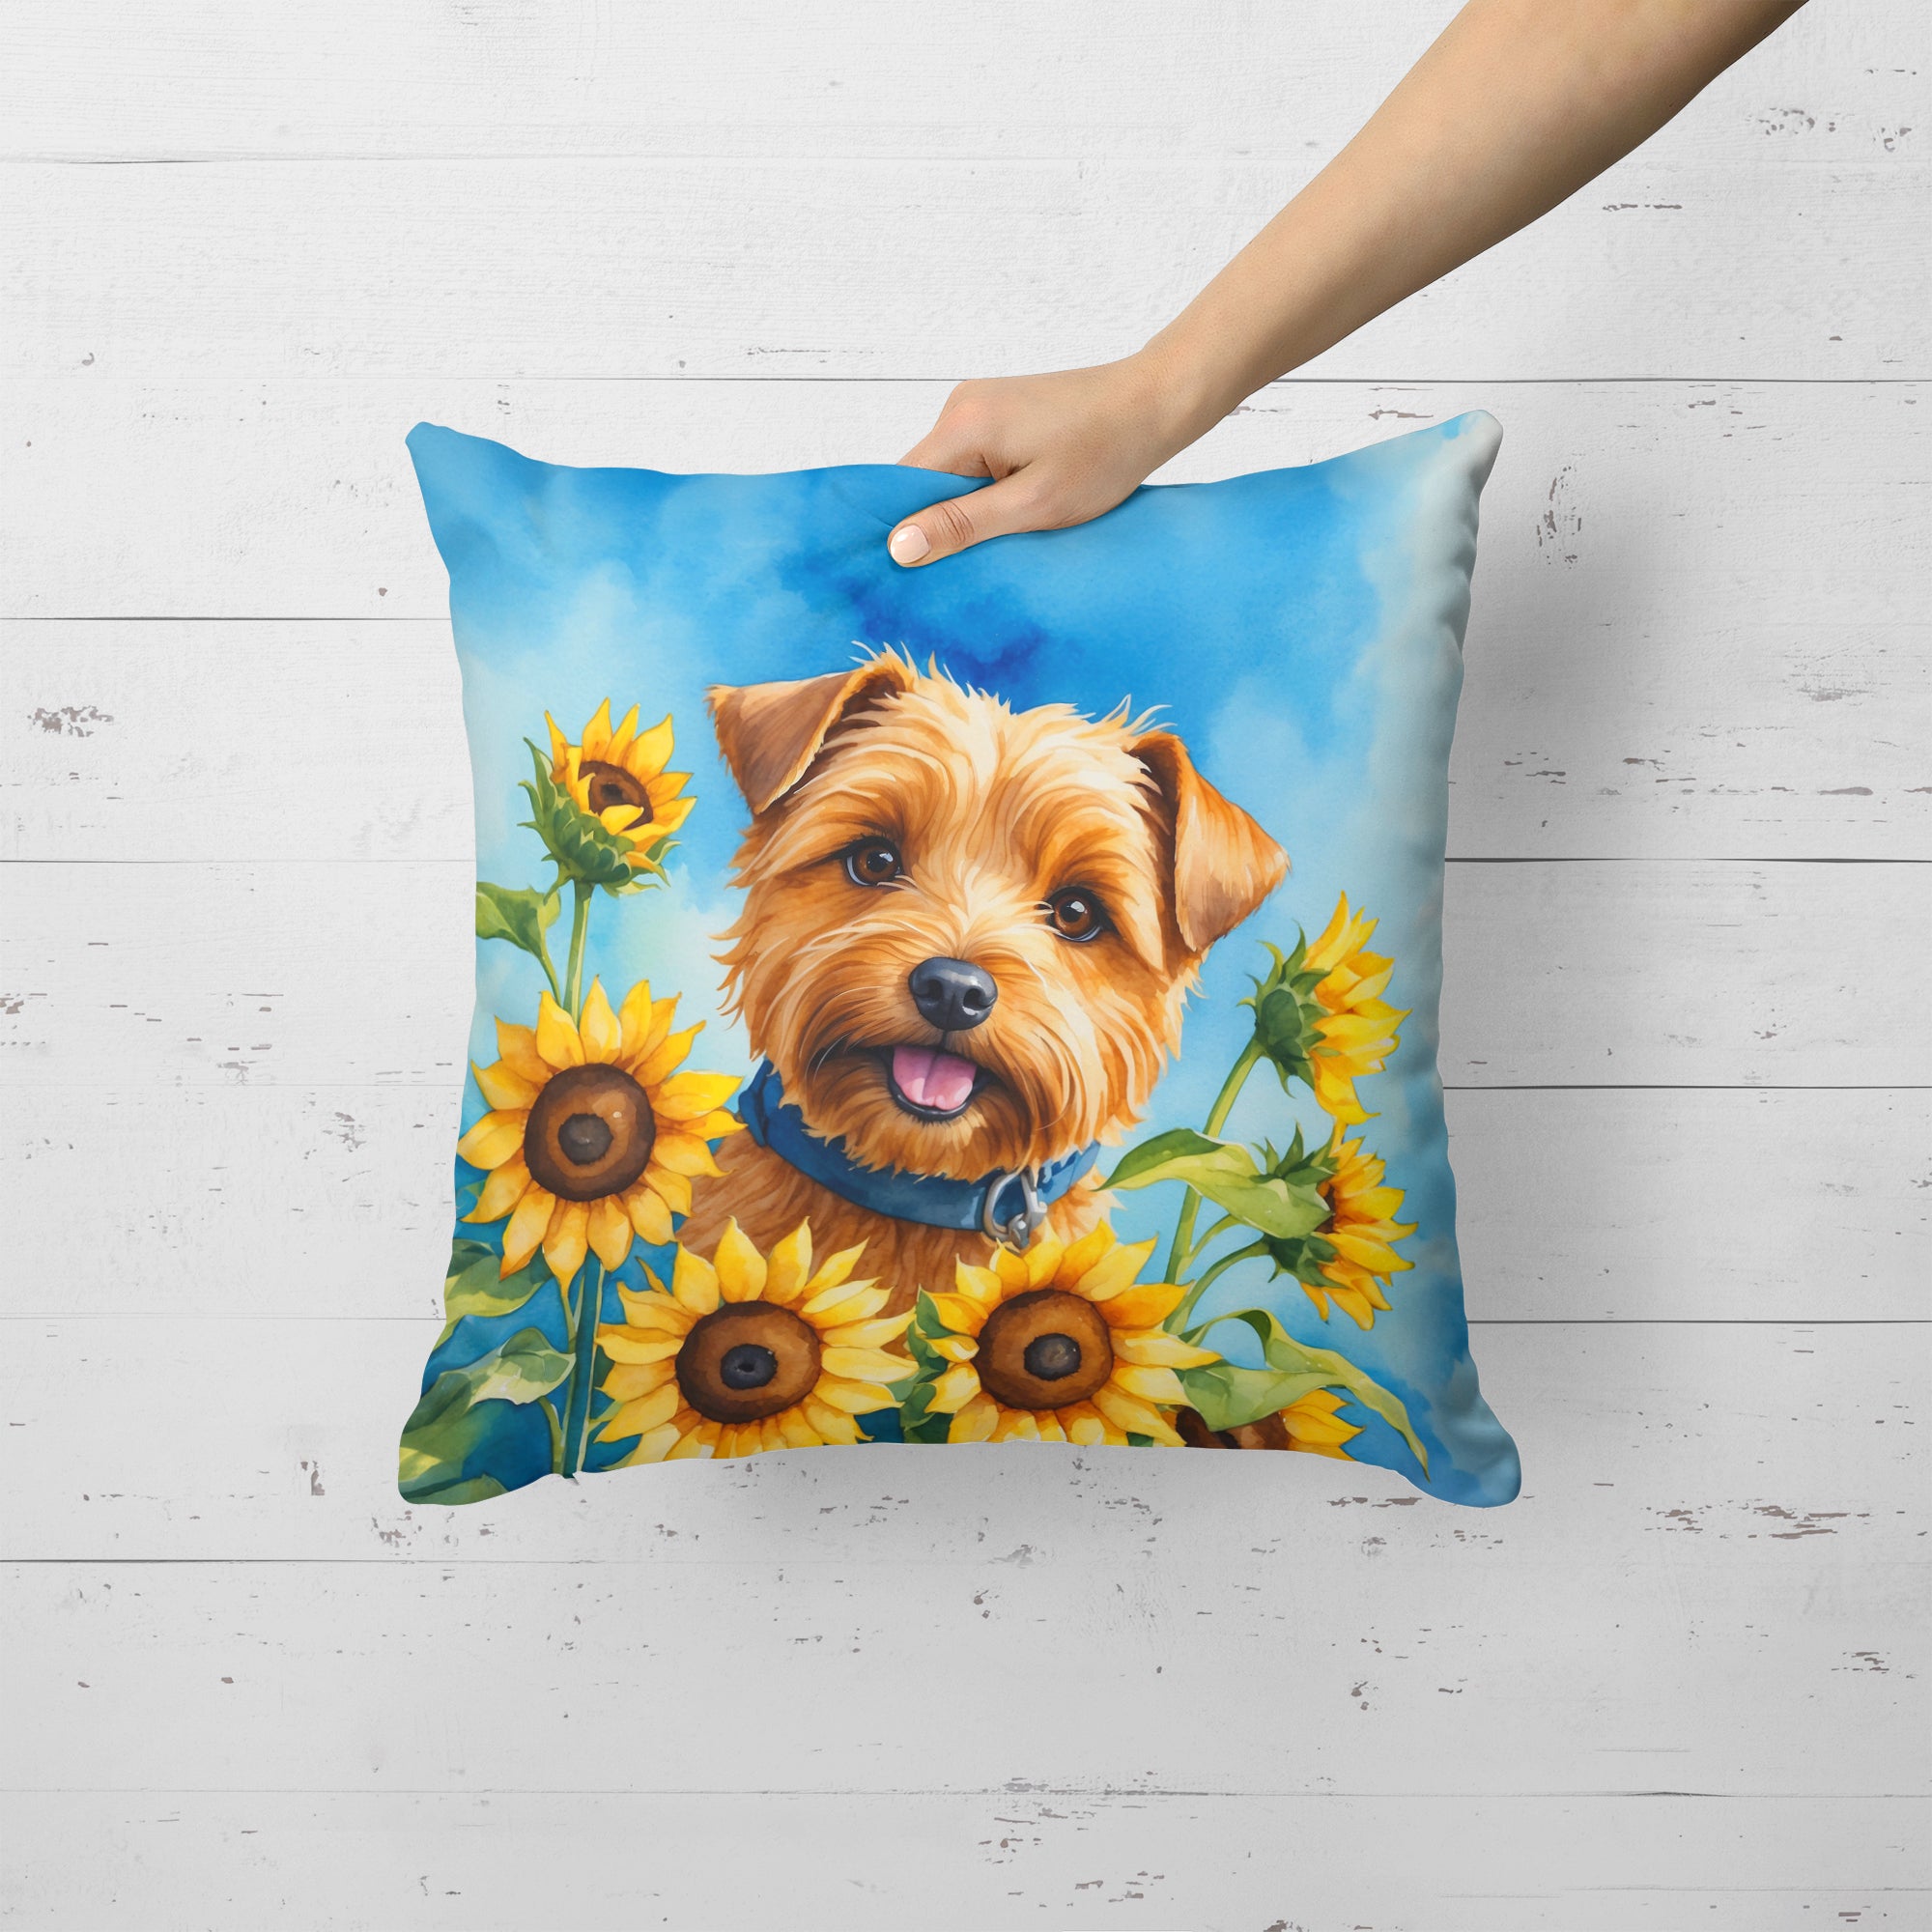 Buy this Norfolk Terrier in Sunflowers Throw Pillow